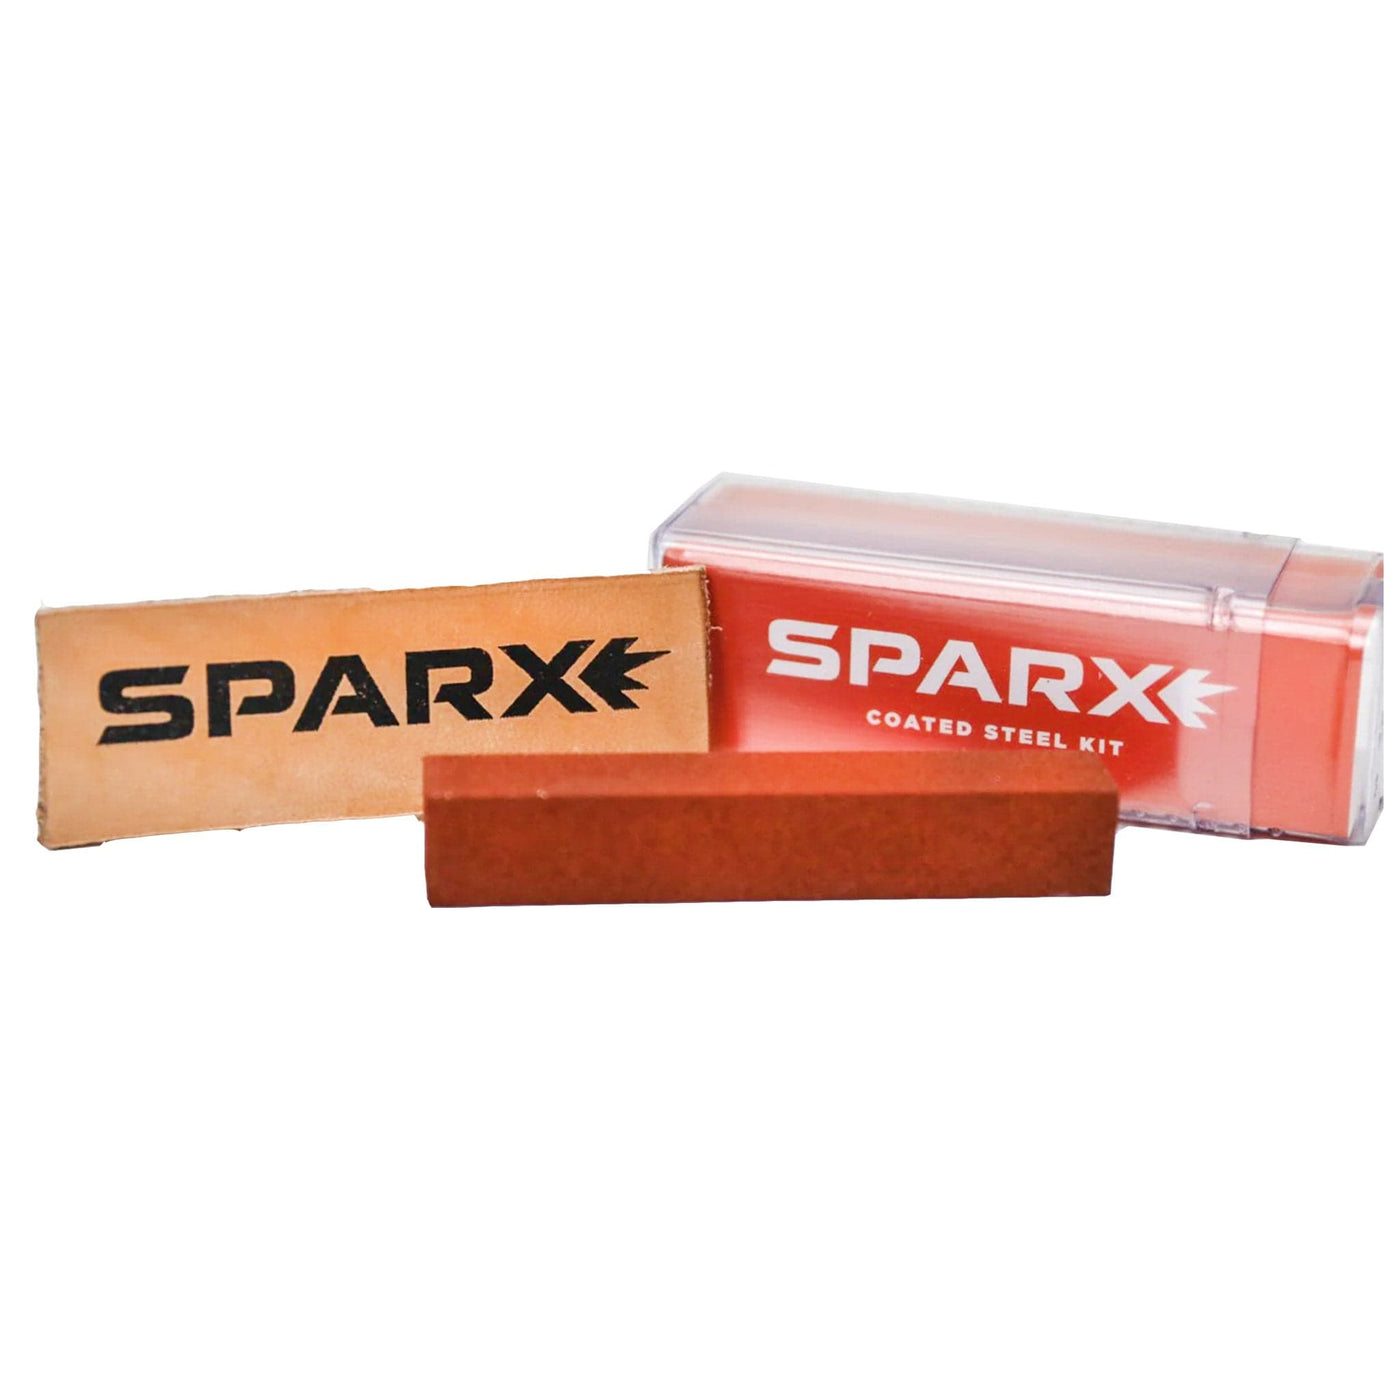 Sparx Coated Steel Kit - The Hockey Shop Source For Sports